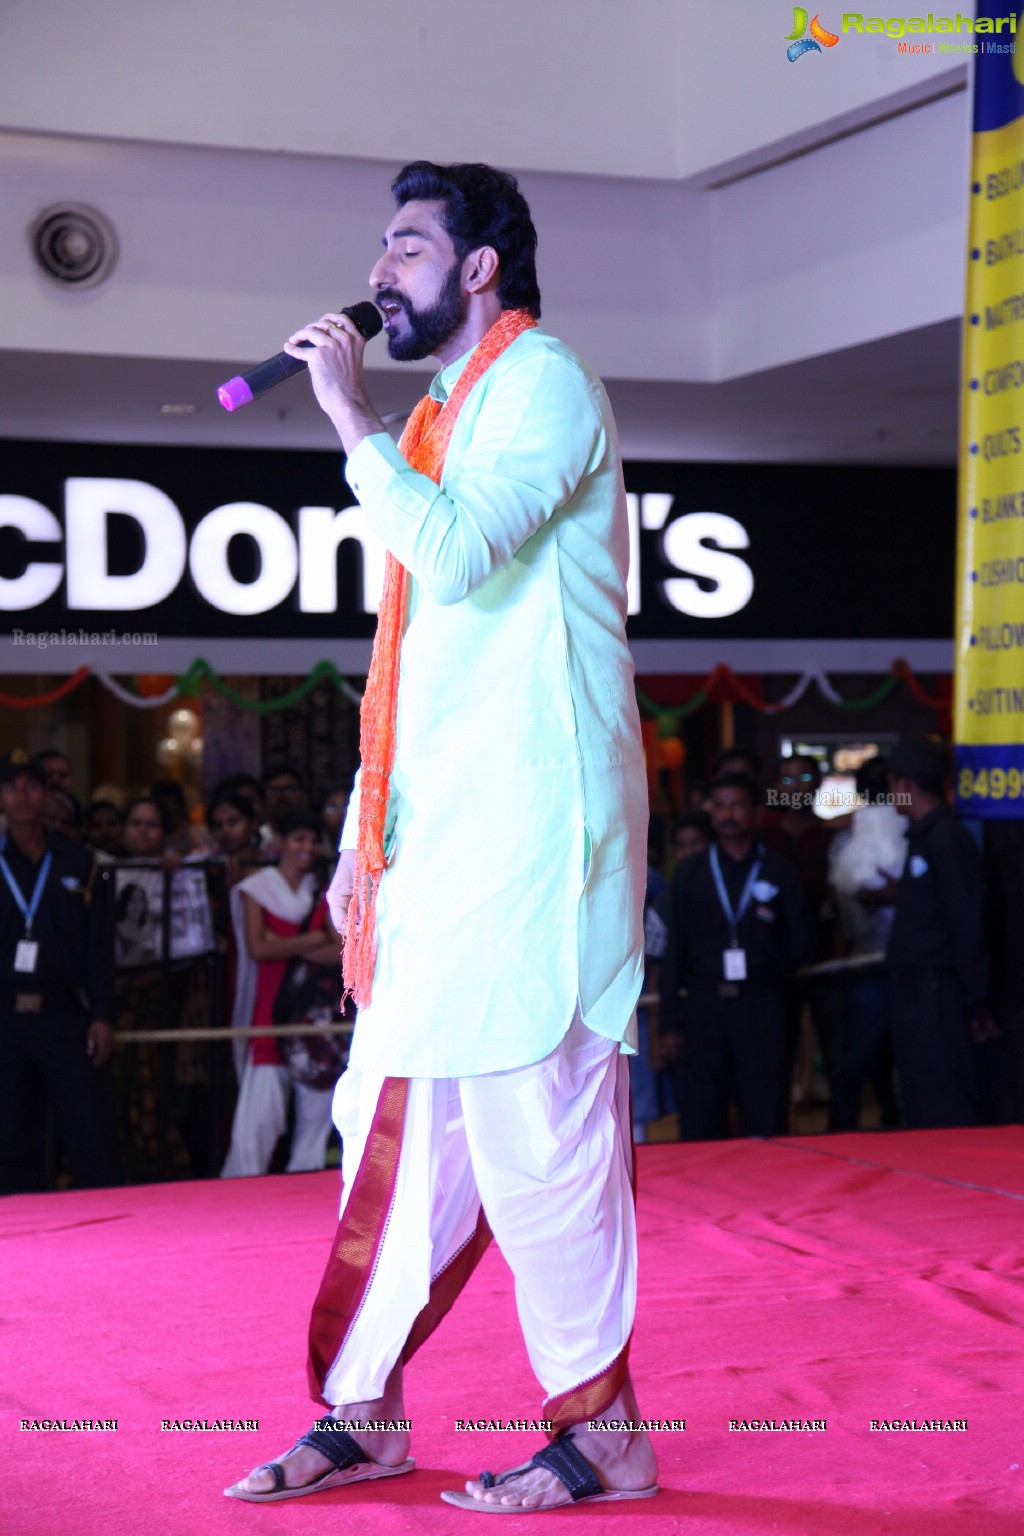 Memey Indians by RED FM 93.5 at Manjeera Mall